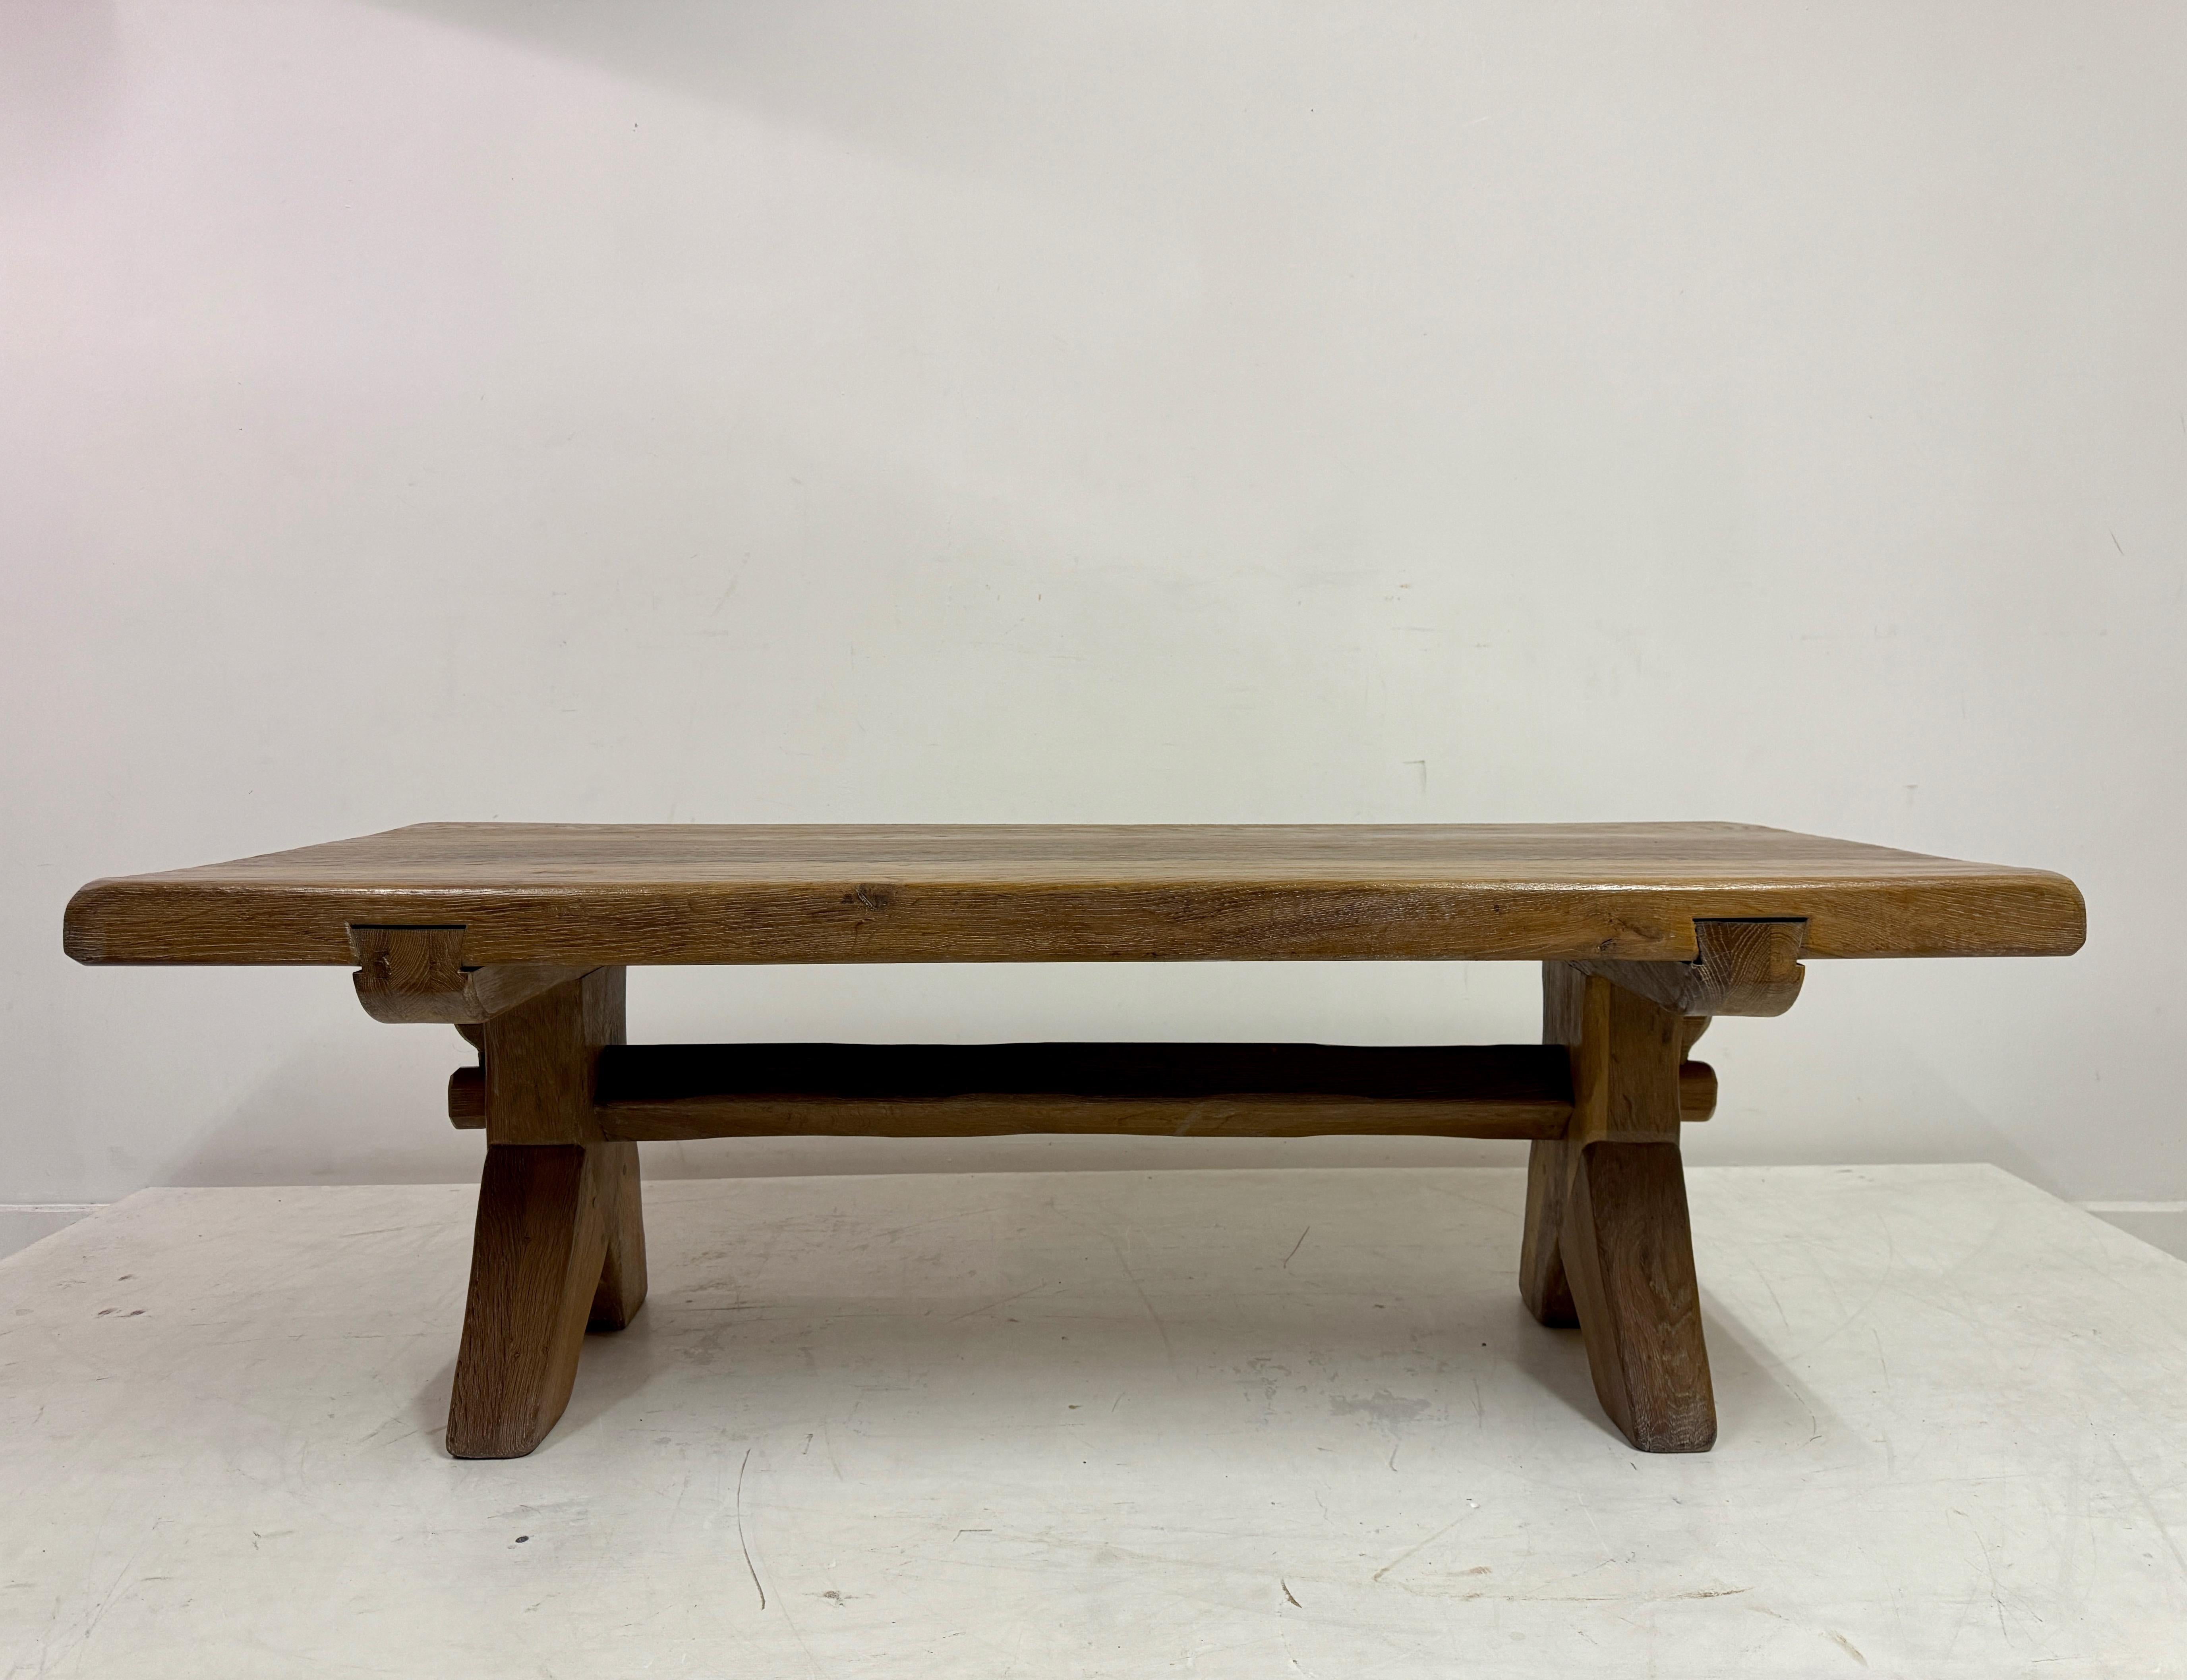 1960s Belgian Brutalist Coffee Table By De Puydt In Good Condition For Sale In London, London